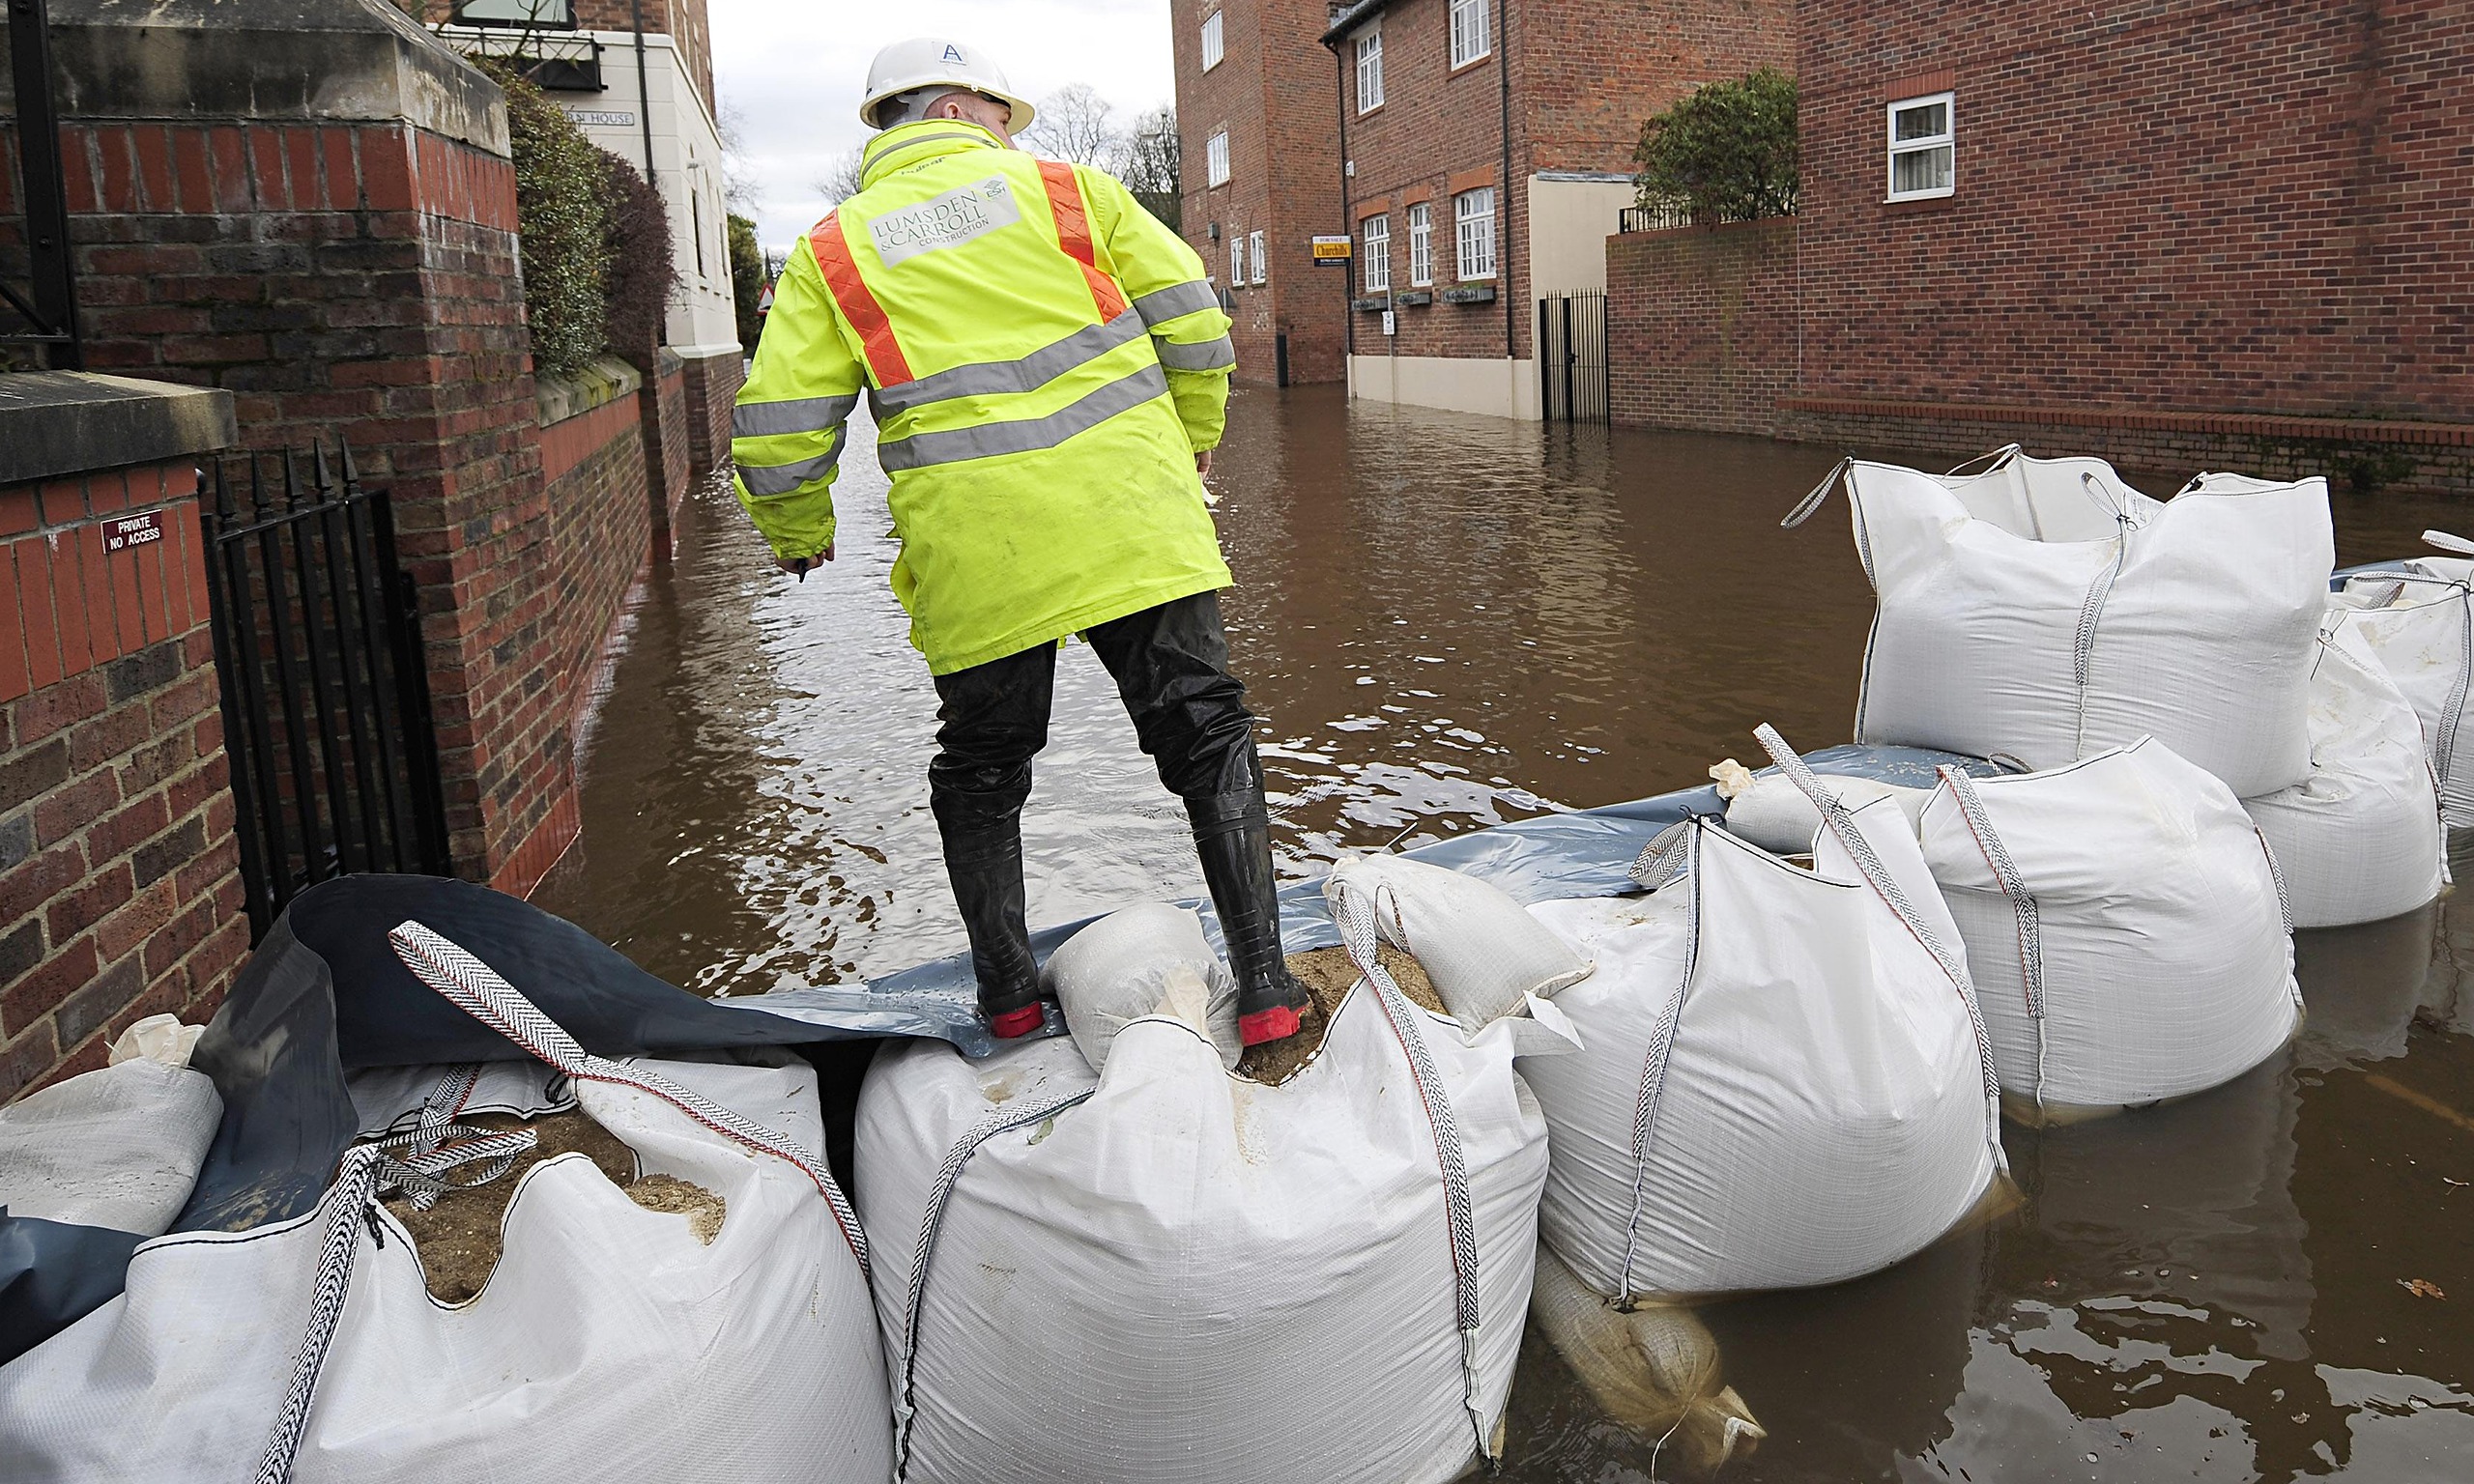 Sandbags ineffective compared with alternatives, say flooding experts